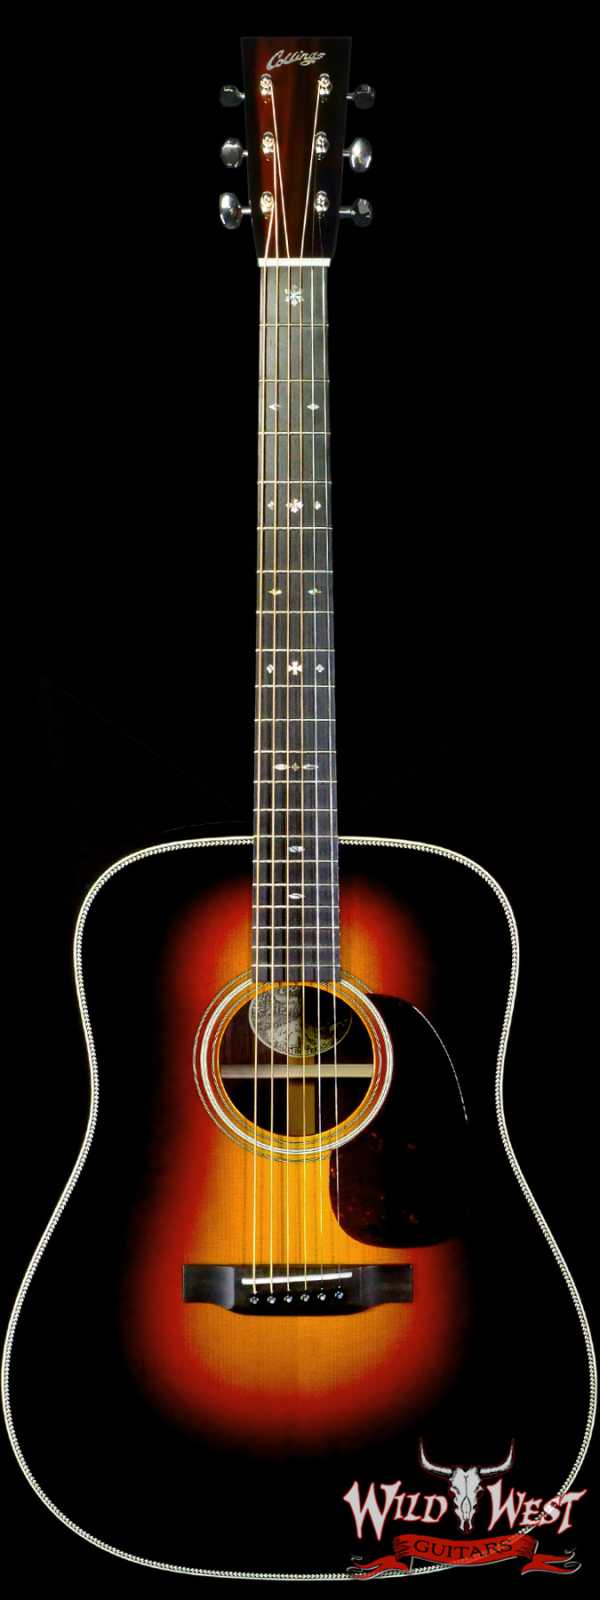 Collings D Serise Dreadnought D2H Sitka Spruce Top East Indian Rosewood Back & Sides 45 Style Snowflake Inlays Sunburst